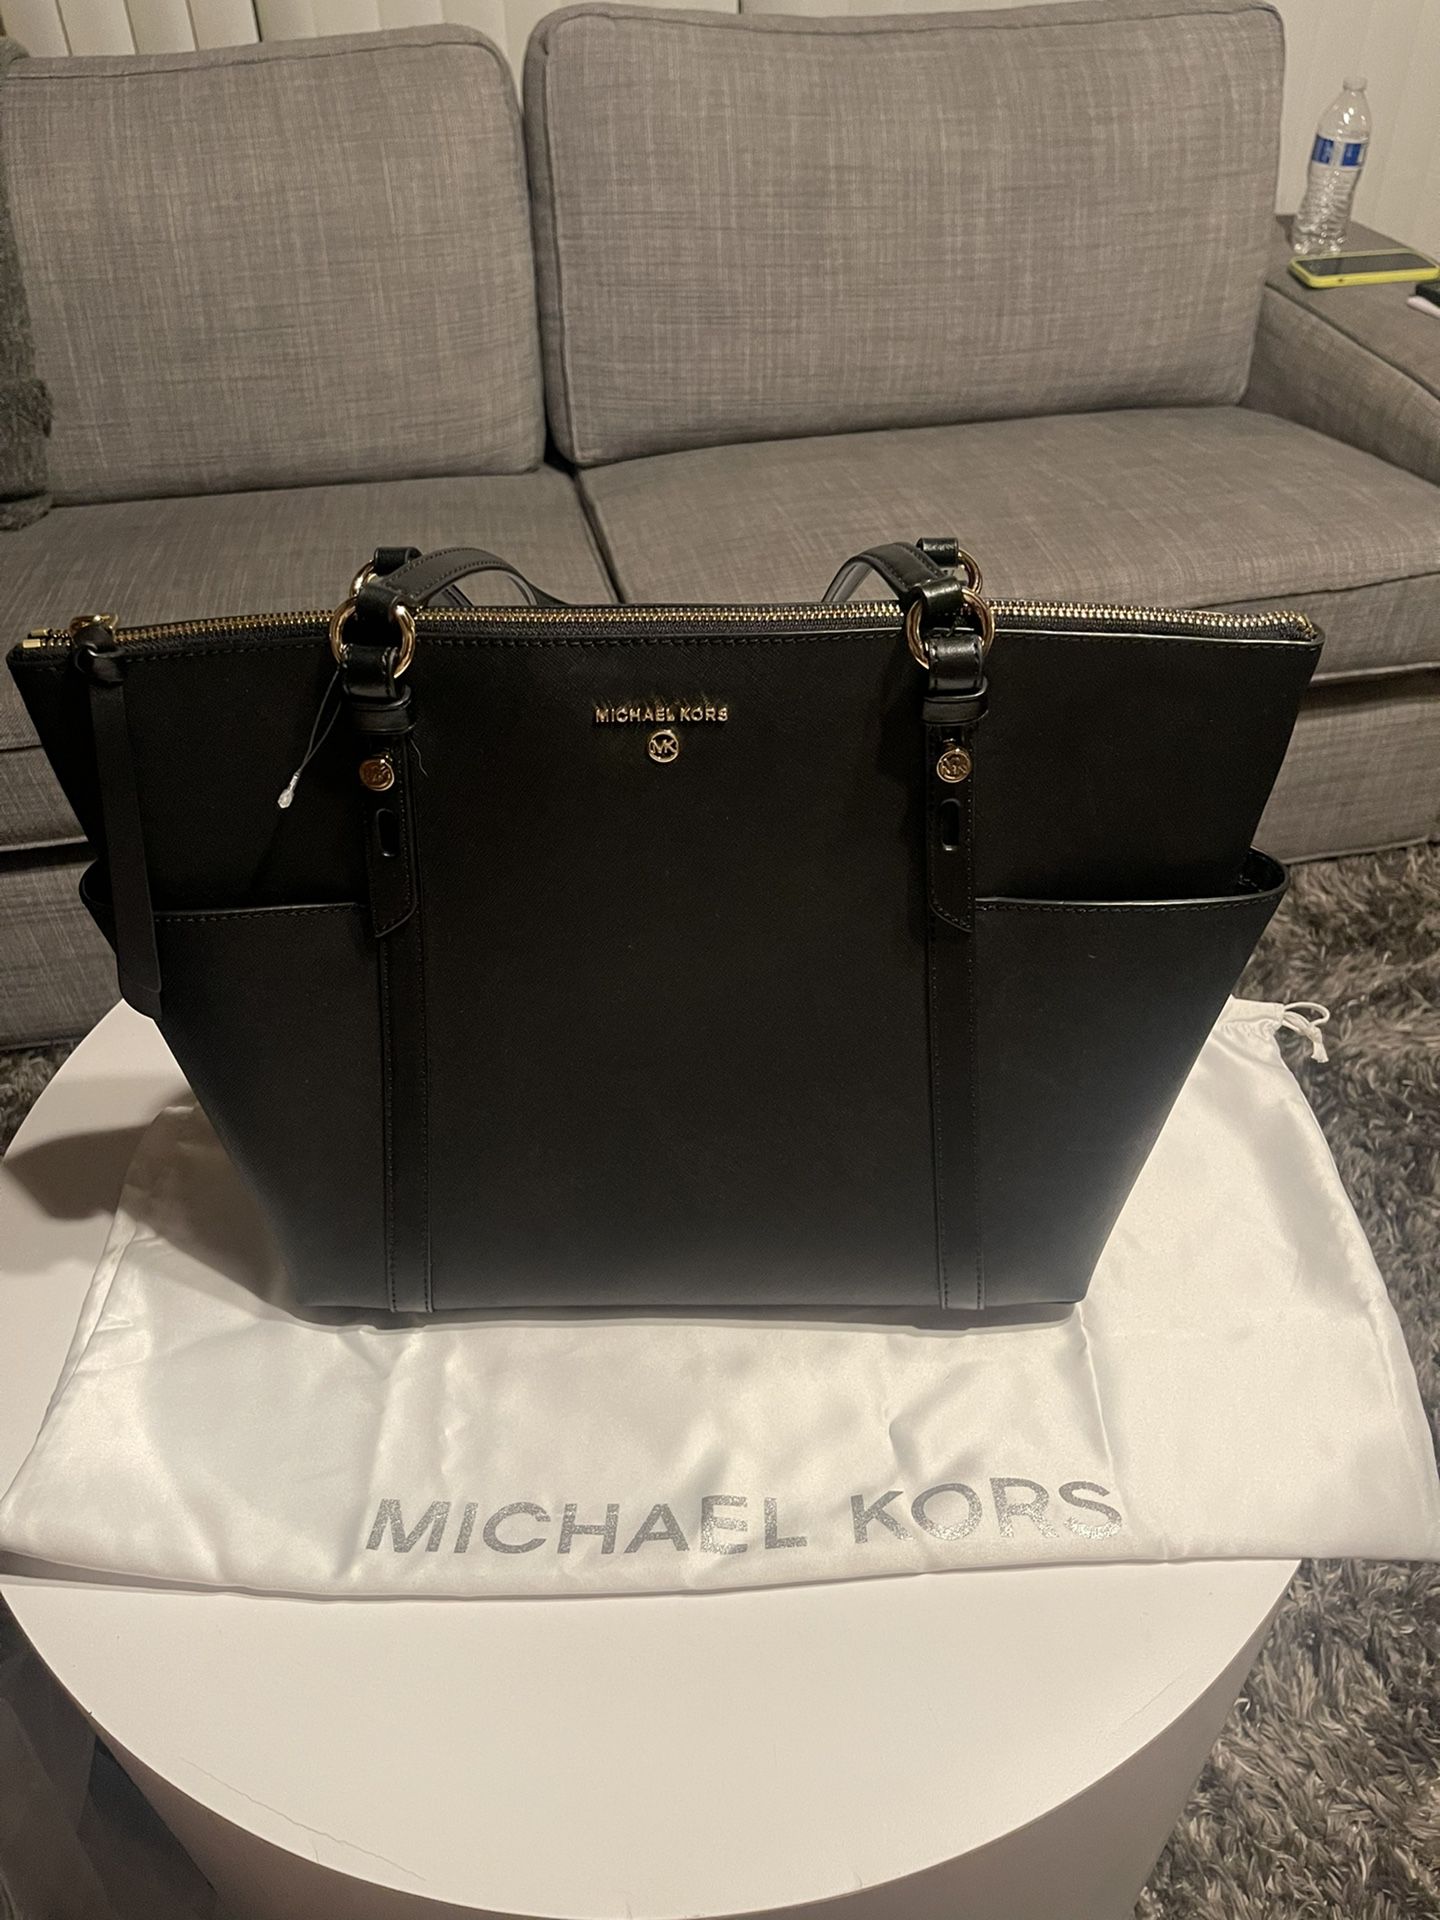 MICHAEL KORS Marilyn Medium Saffiano Leather Tote Bag for Sale in  Pineville, NC - OfferUp